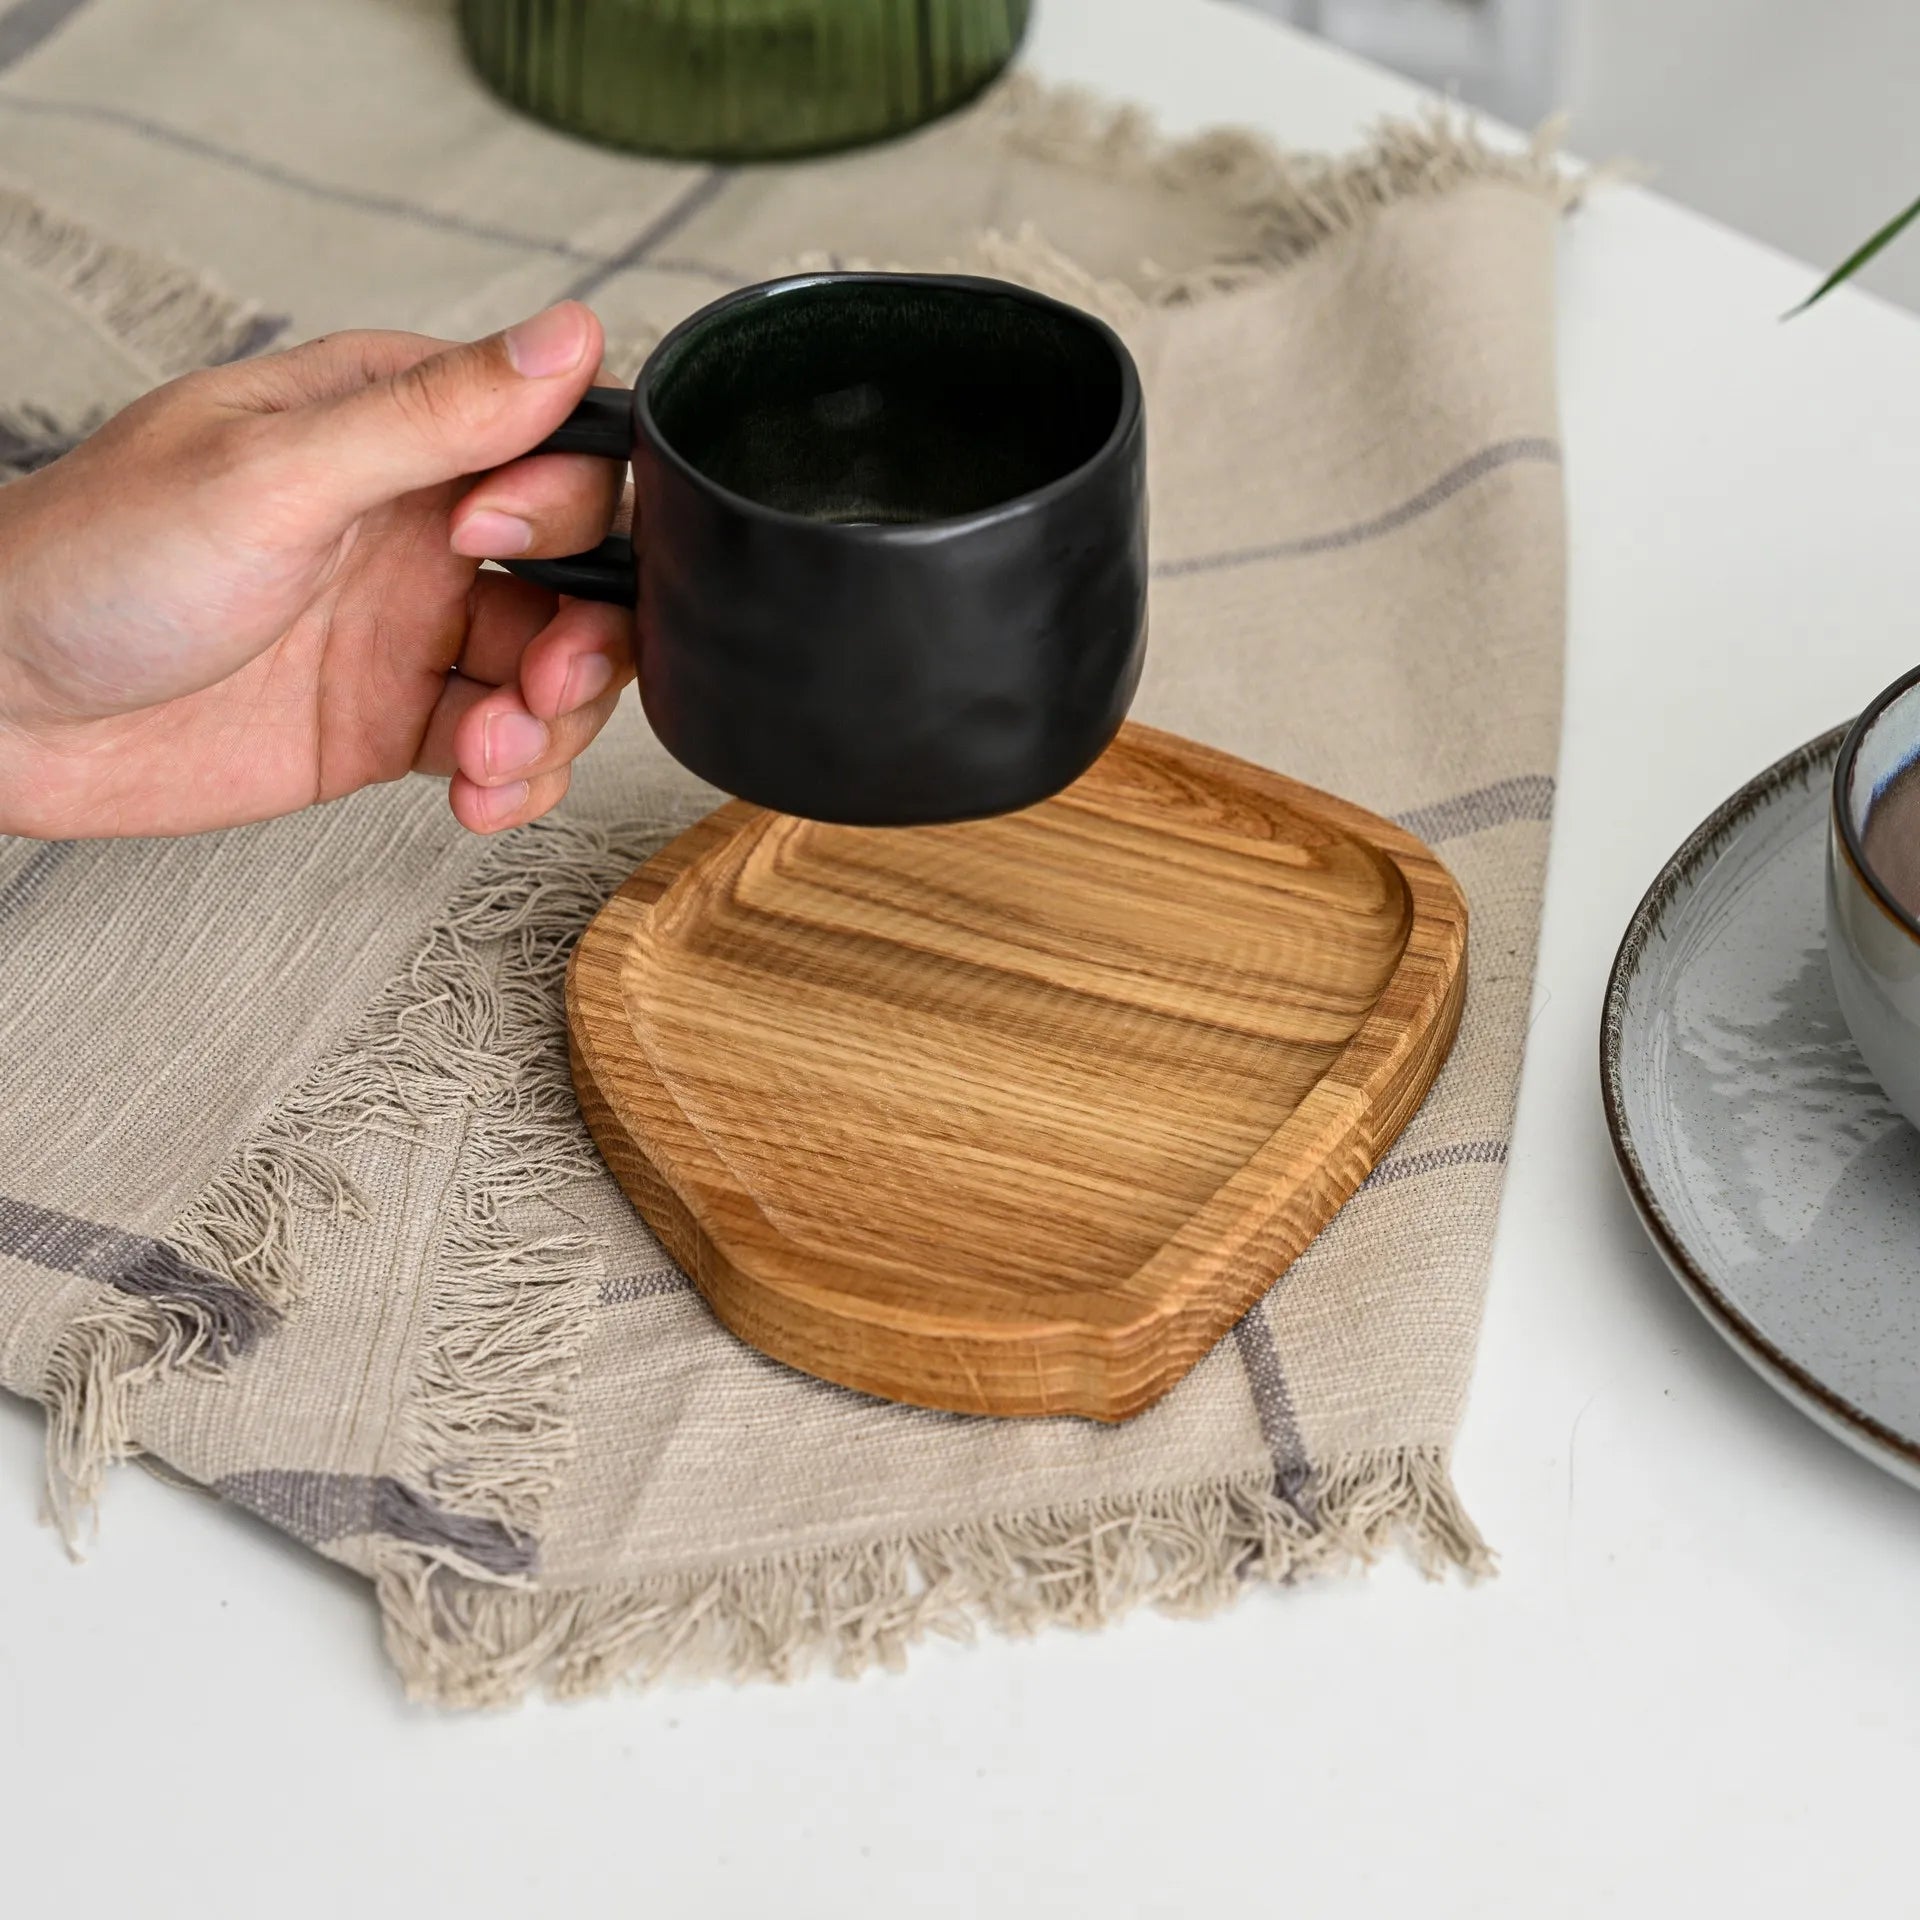 Customizable kitchen tray with a rustic charm, tailored for unique hospitality.